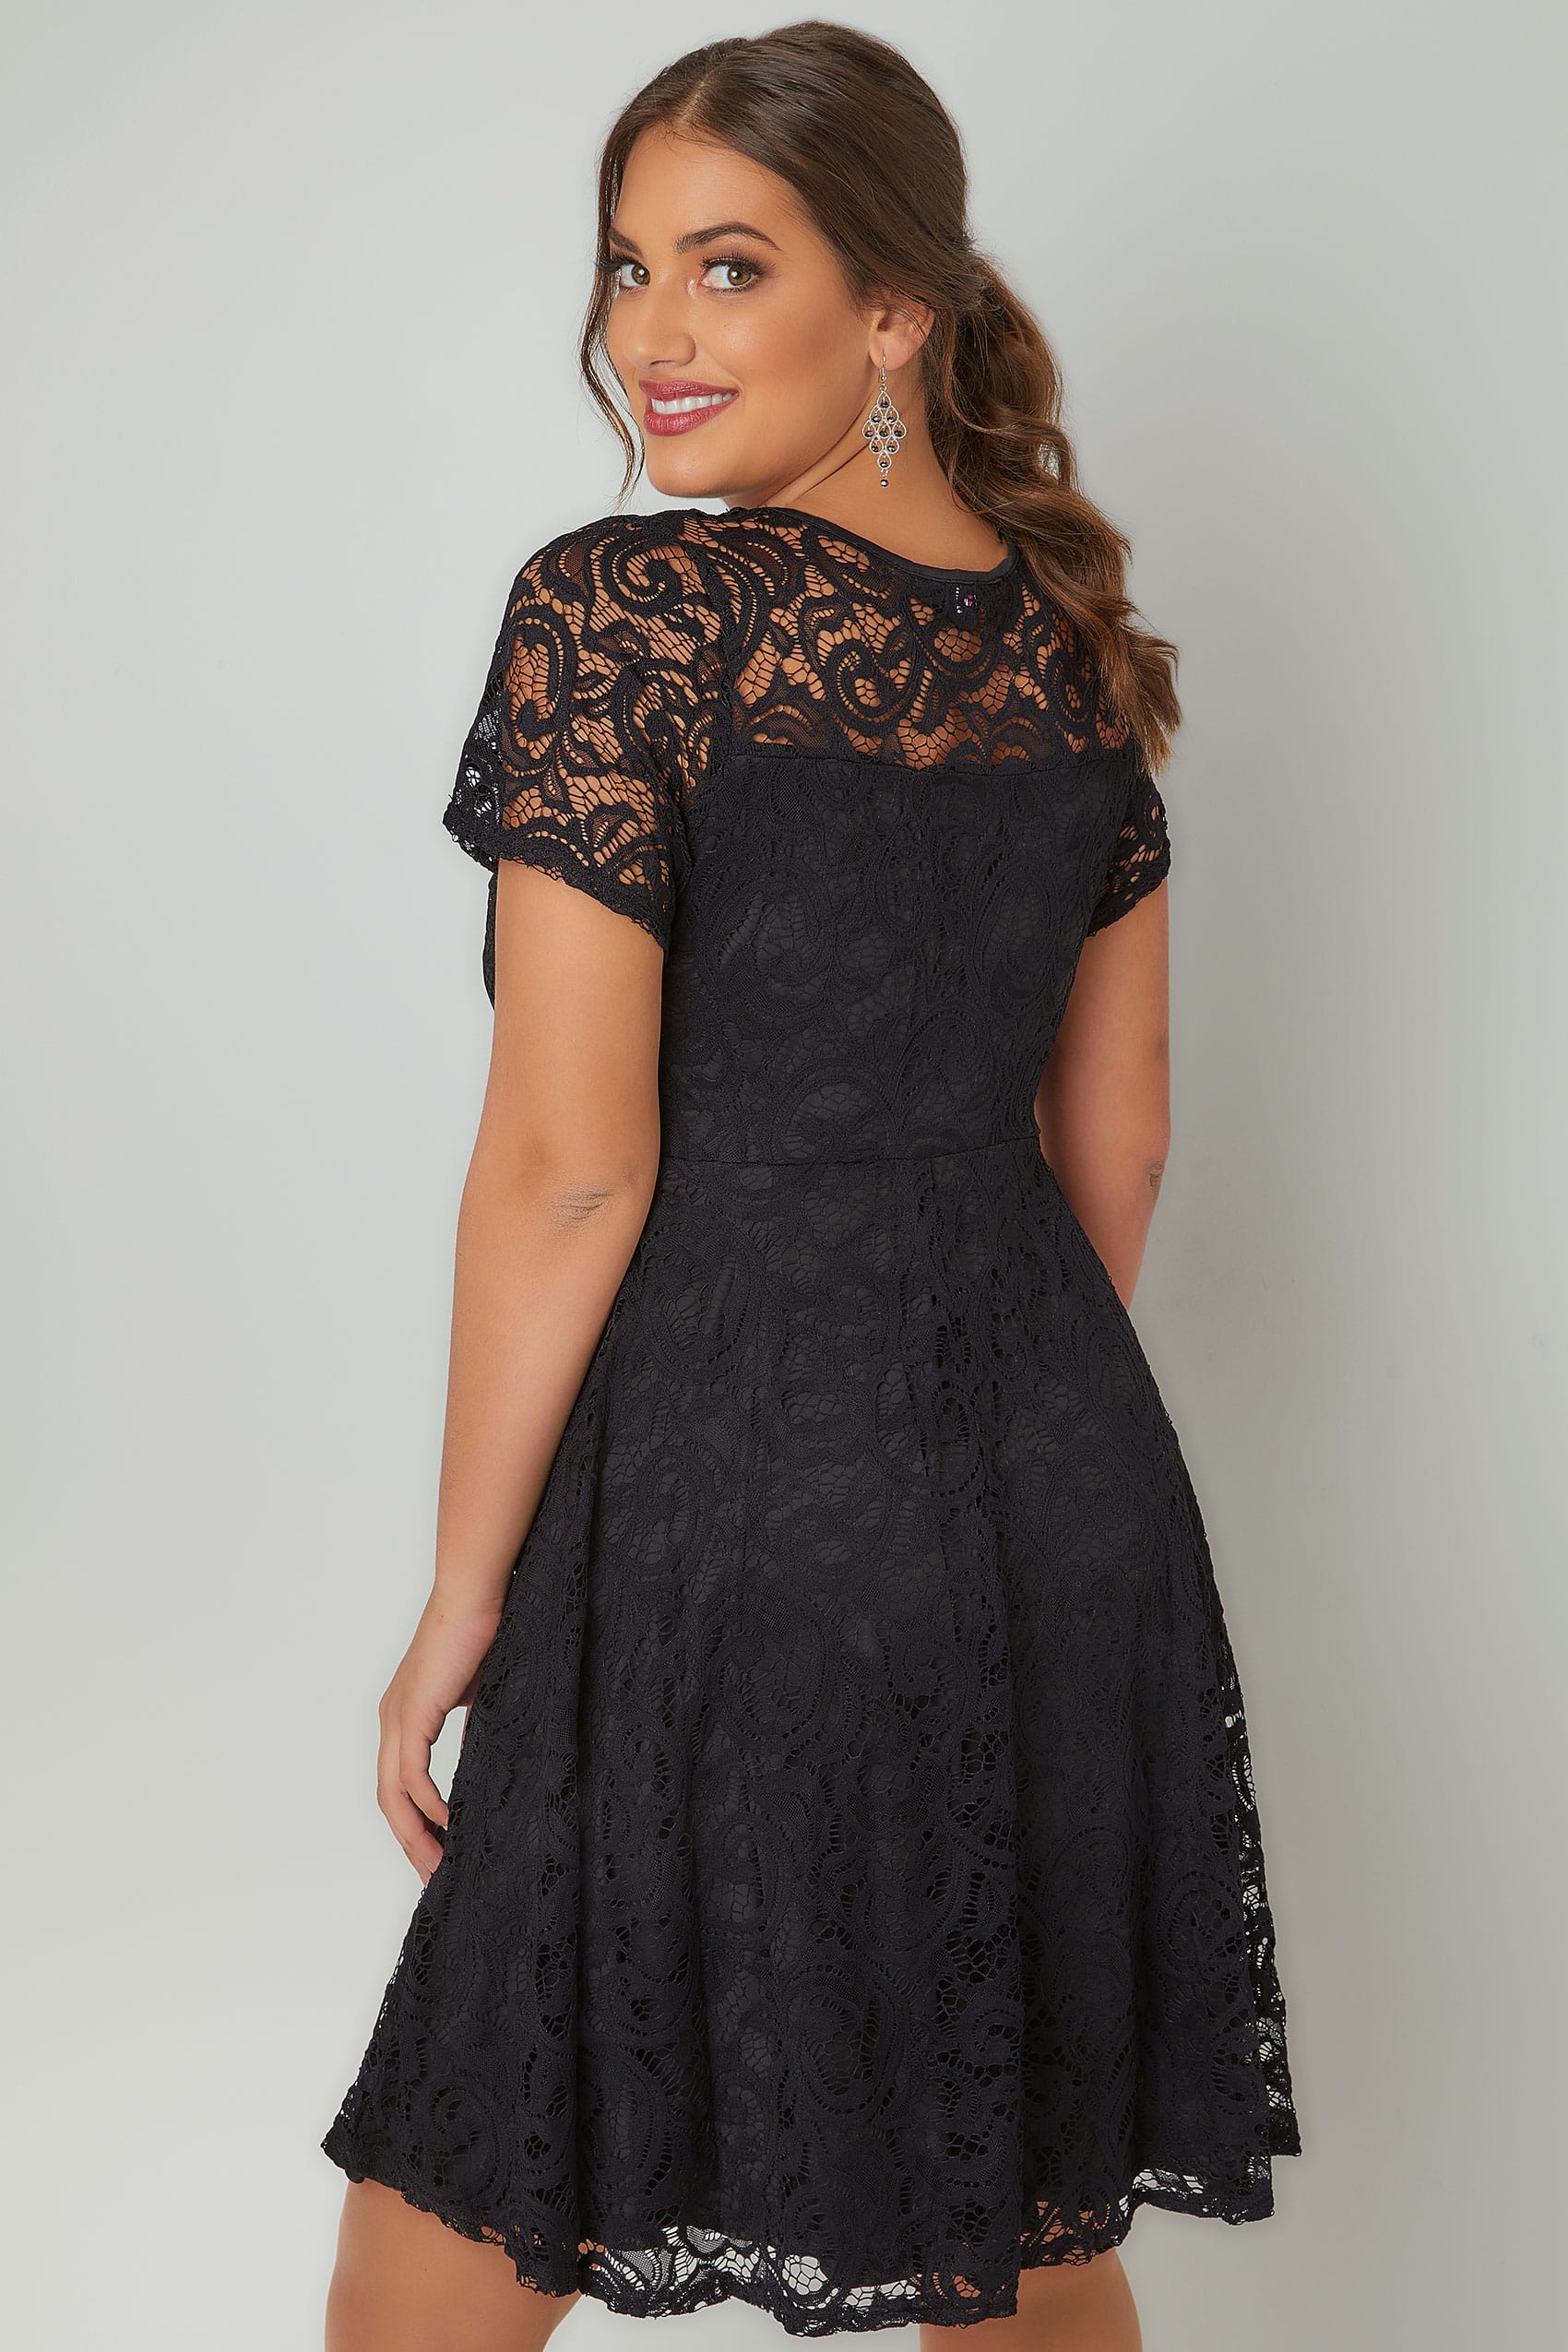 Black Lace Skater Dress With Sweetheart Bust Plus Size To